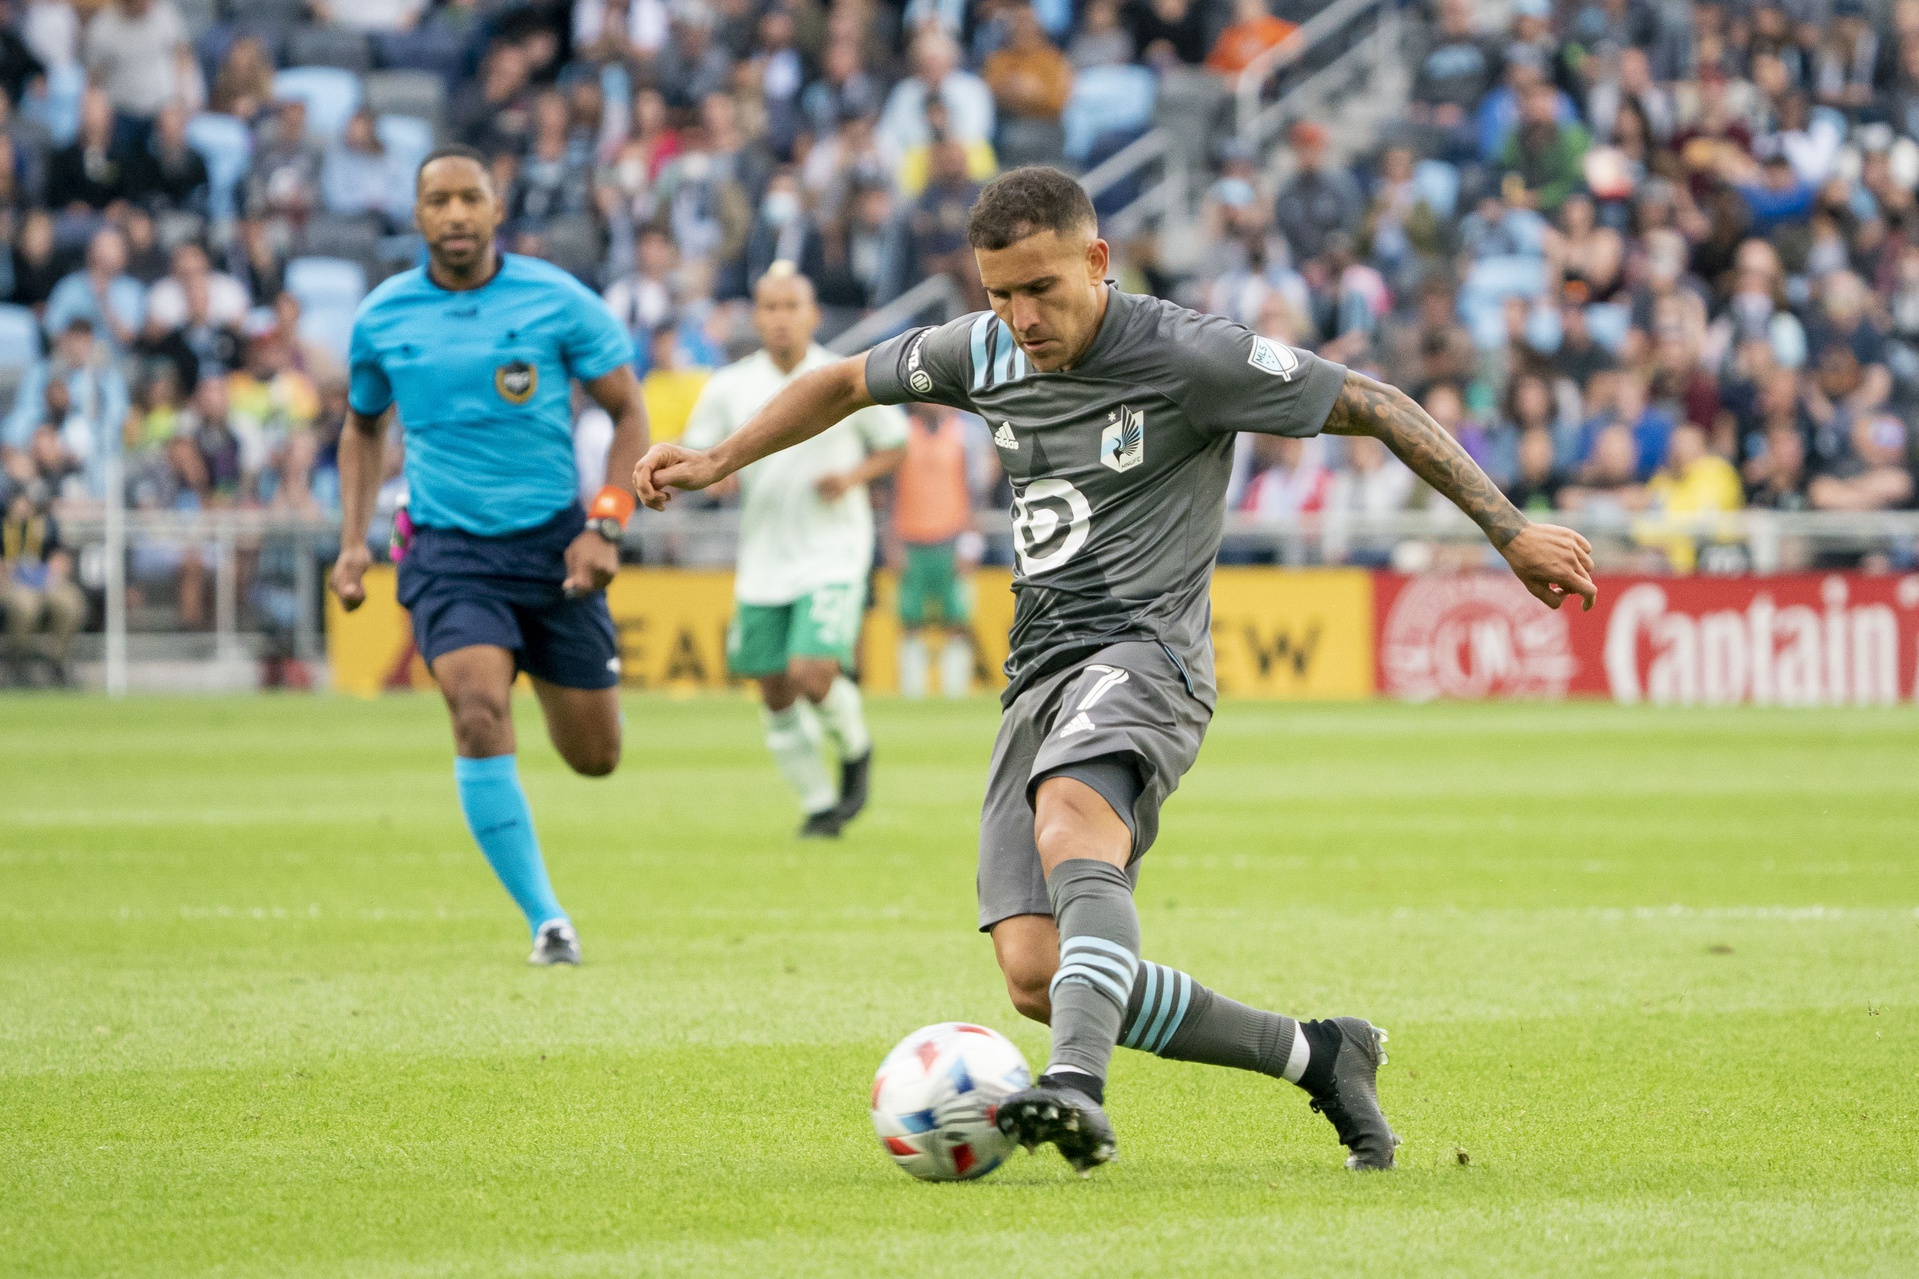 Know Before You Go: MNUFC vs. St. Louis CITY SC